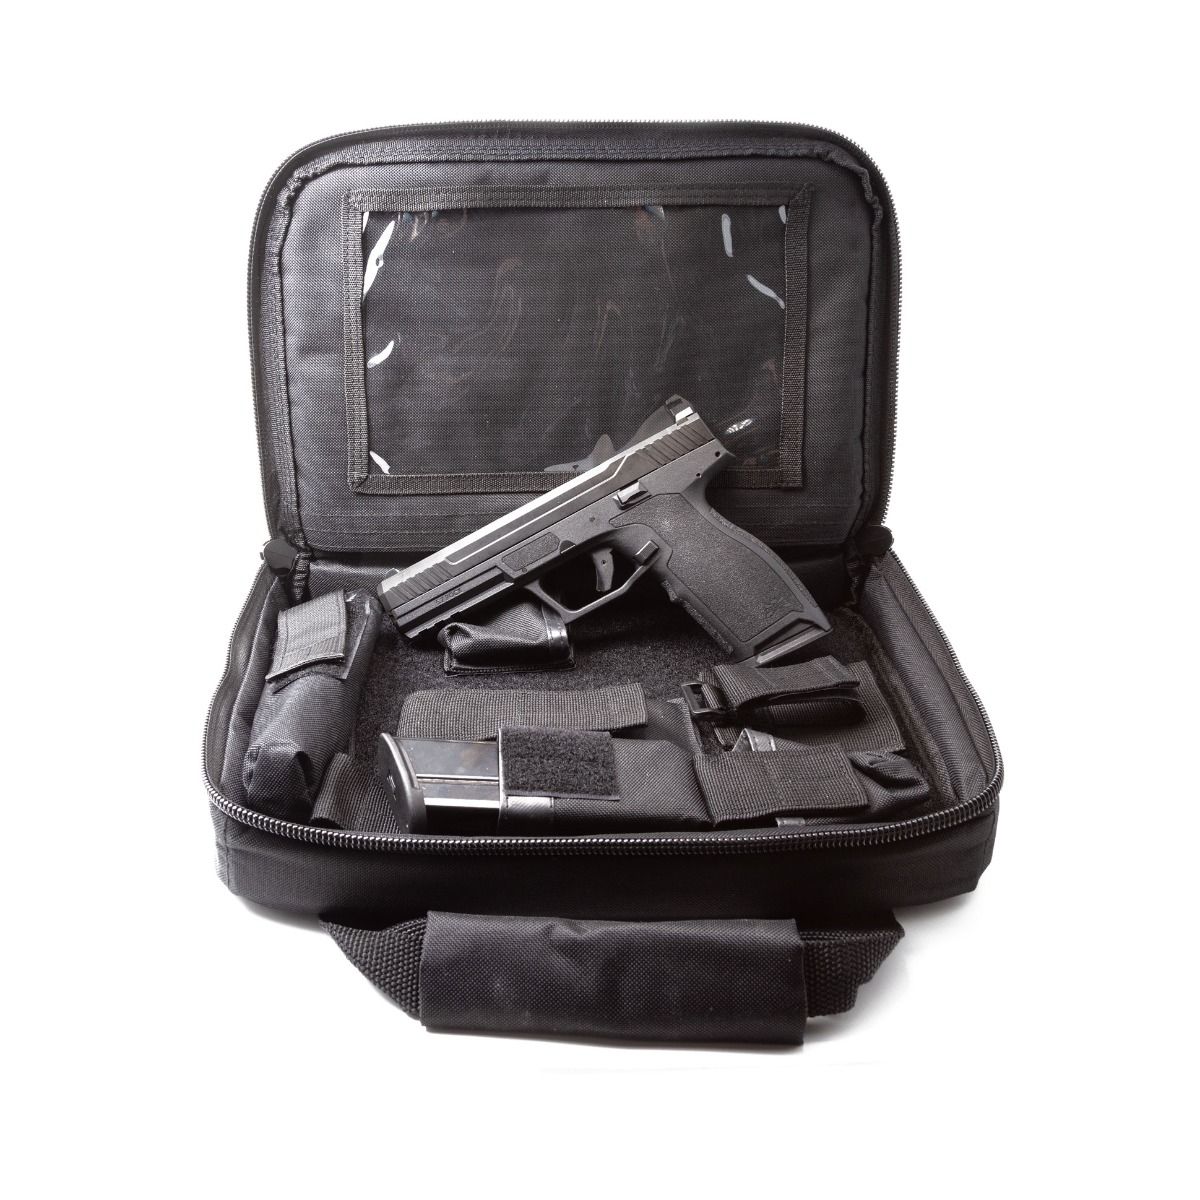 Now Available The Palmetto State Armory 5.7 Rock Pistol (4)